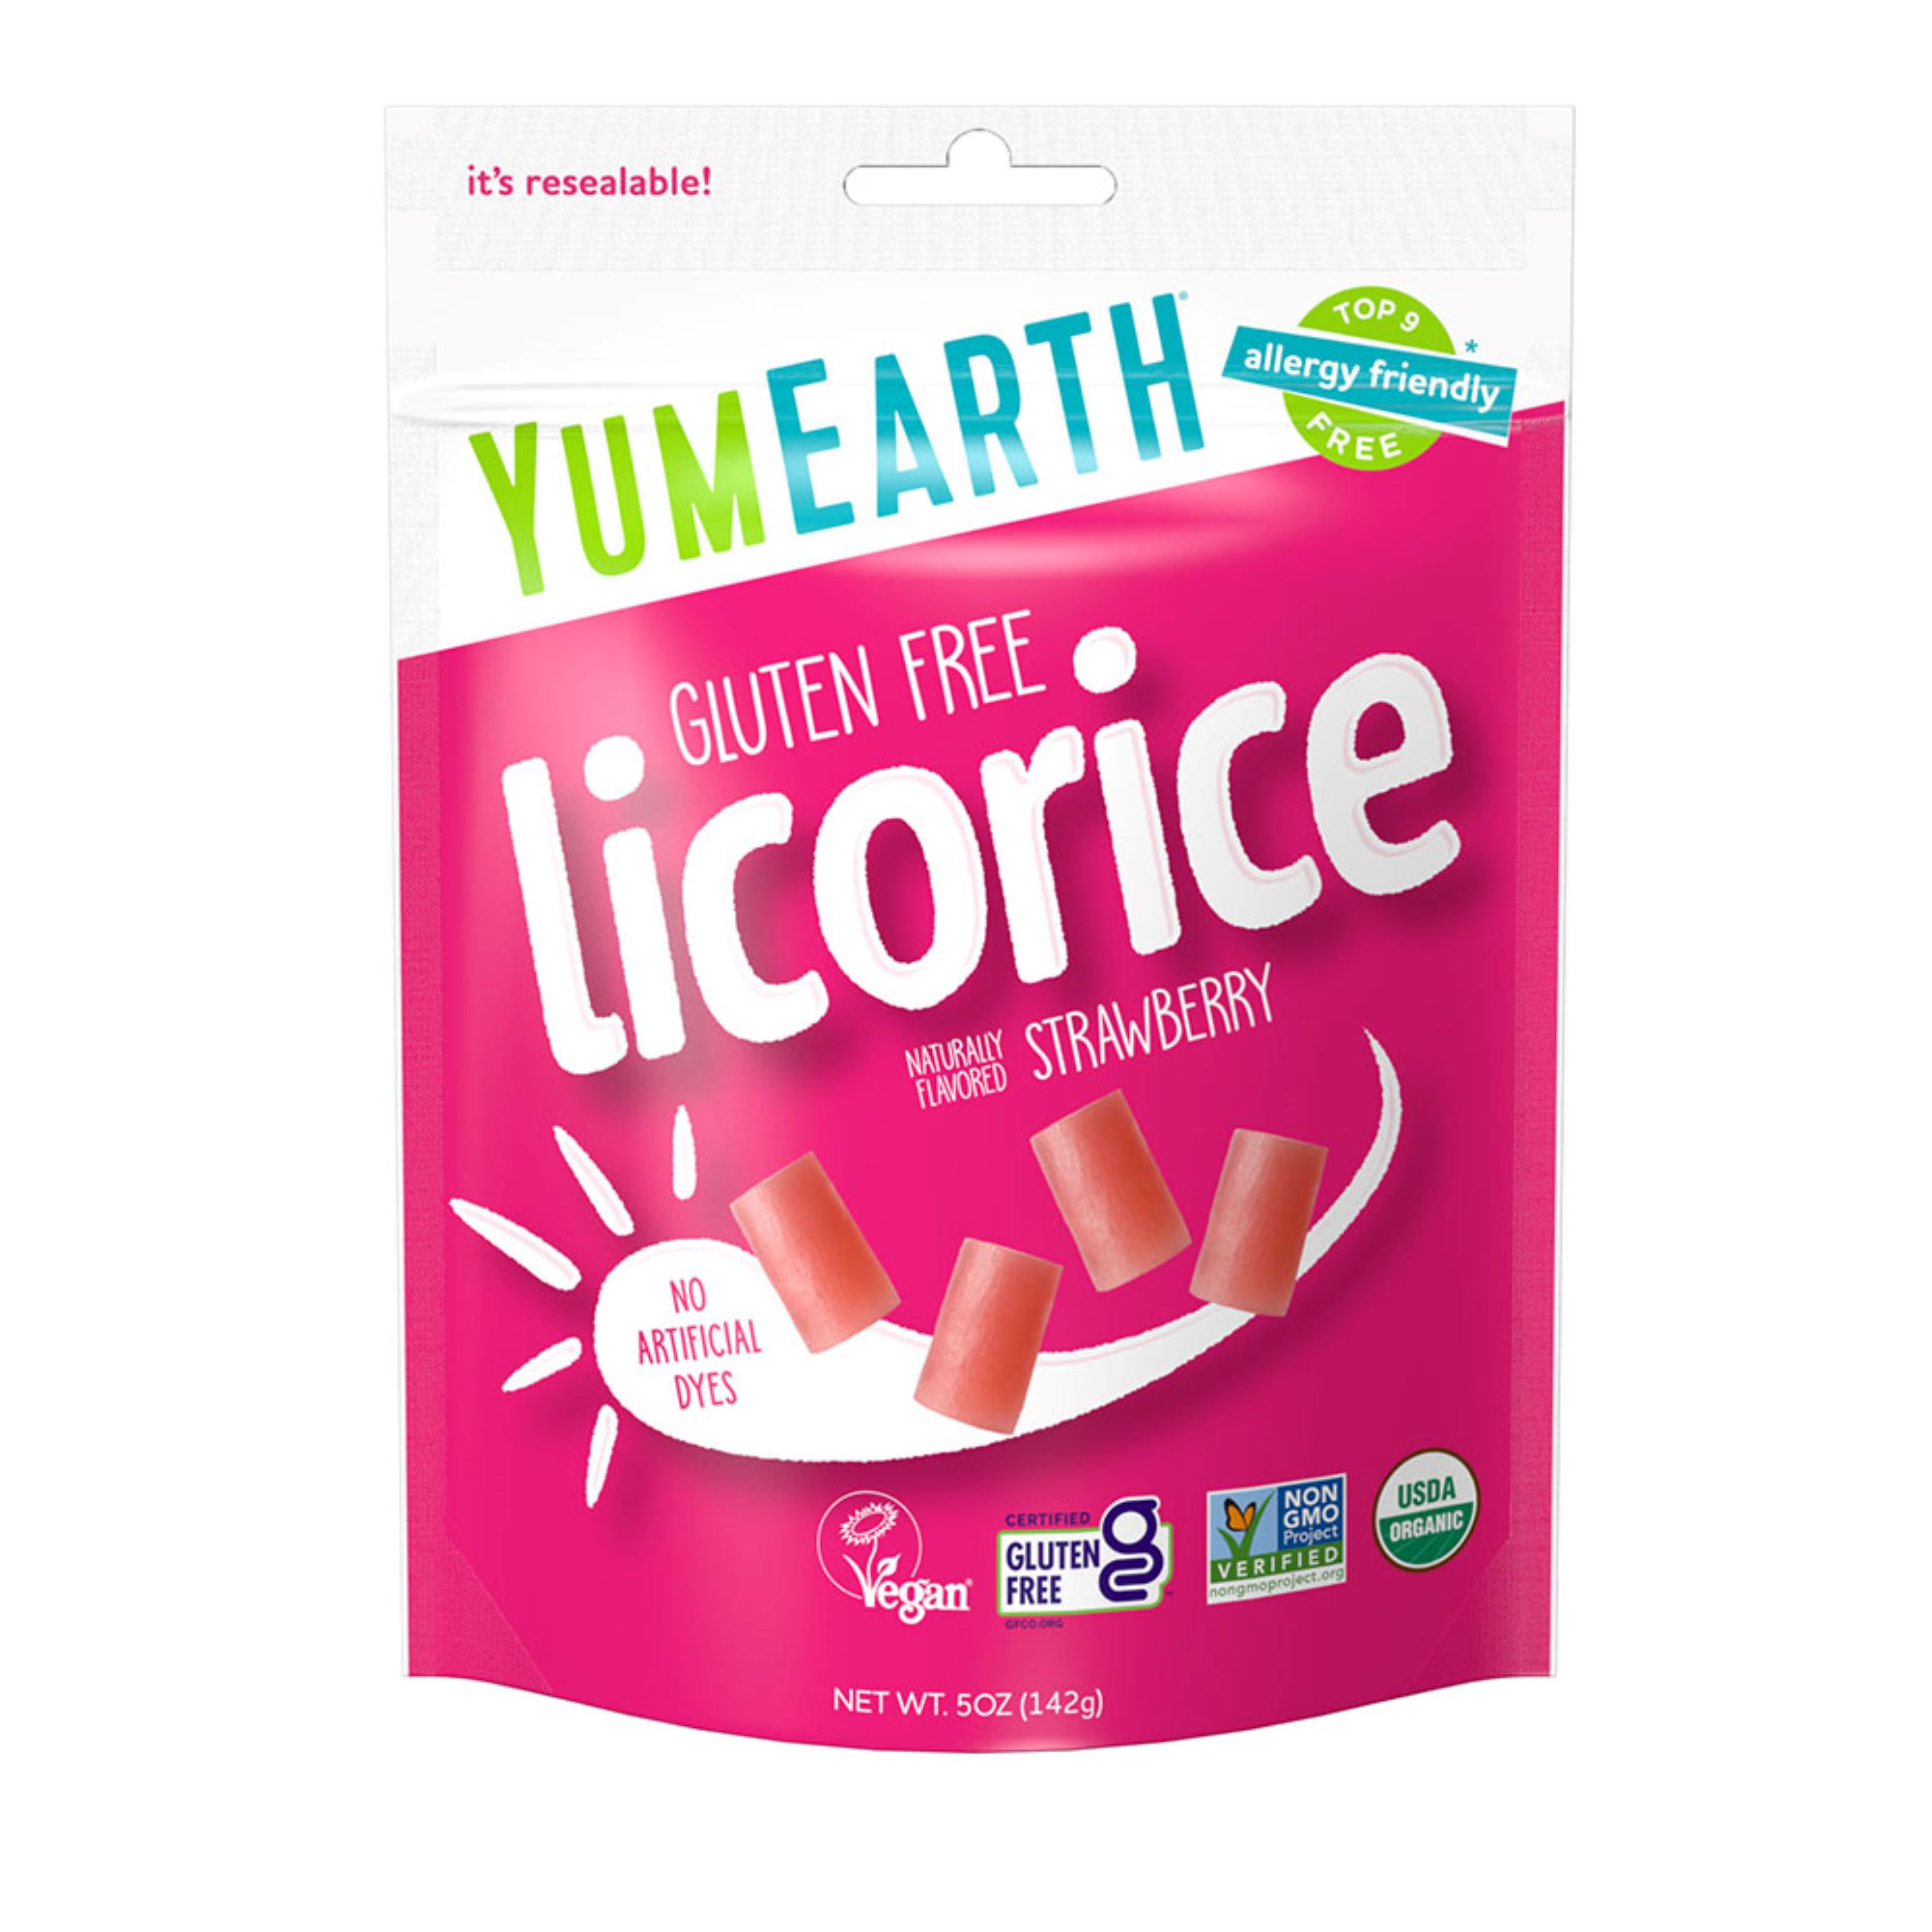 YumEarth Organic Red Strawberry Licorice Candy Bites, Gluten Free, 5 oz Bag - image 1 of 8